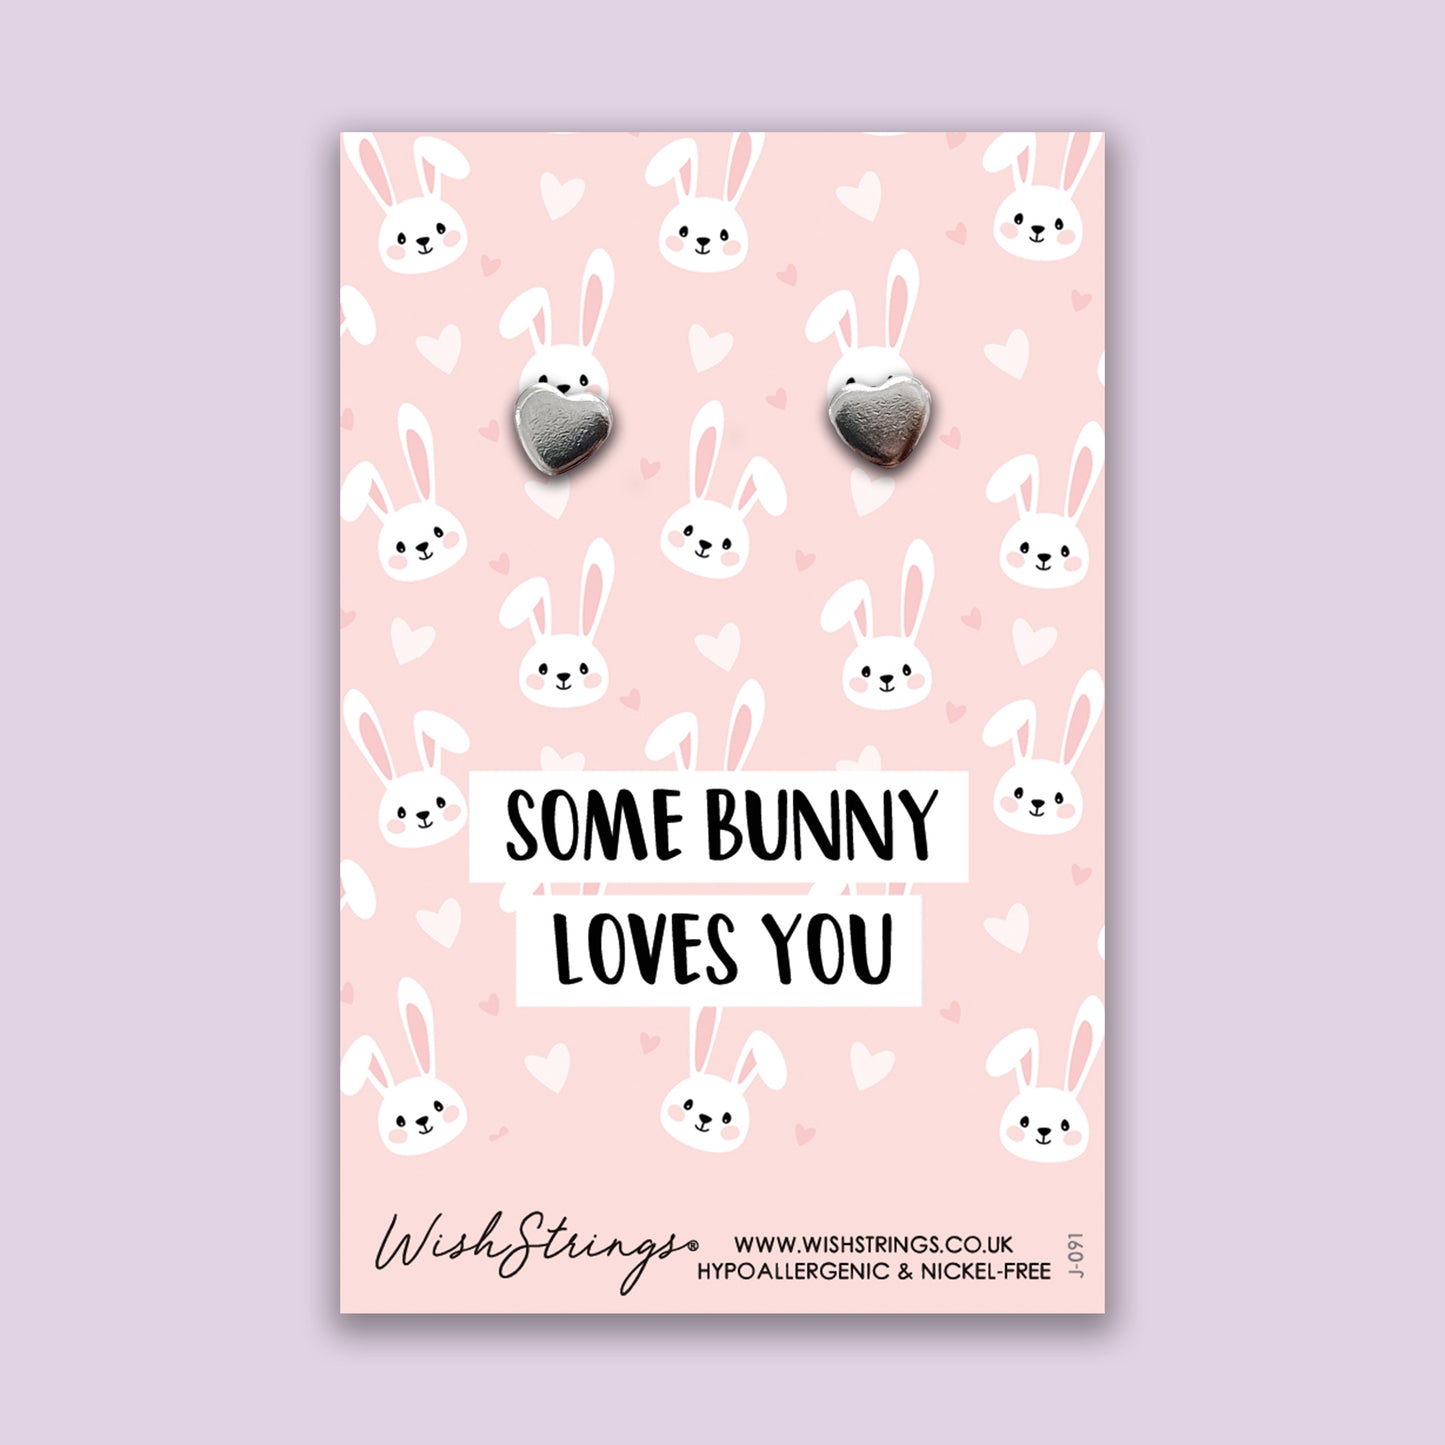 Some Bunny Loves You - Silver Heart Stud Earrings | 304 Stainless - Hypoallergenic